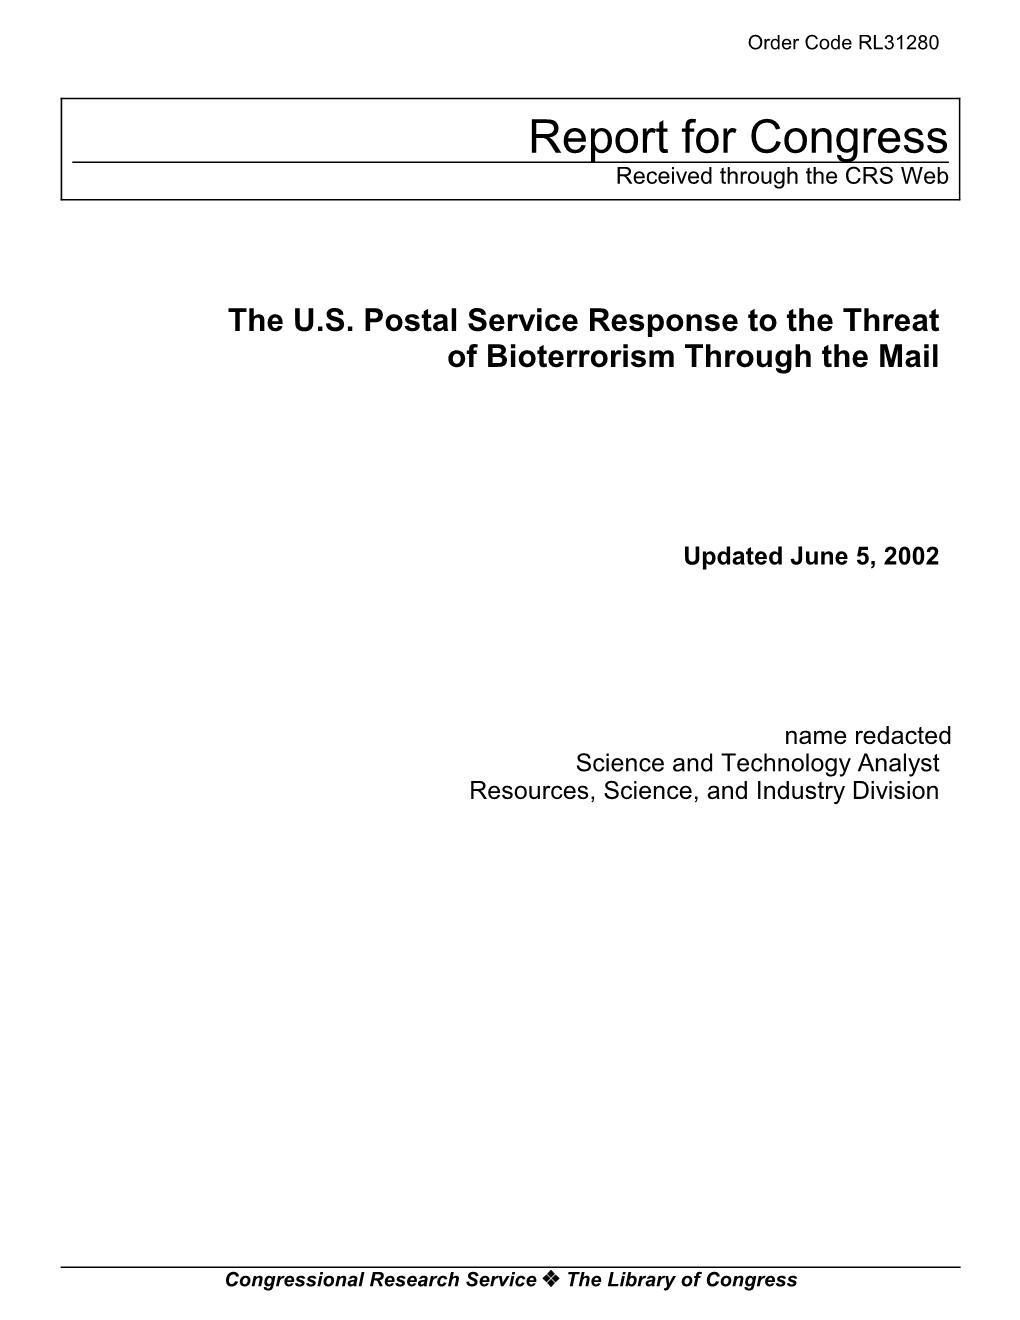 The U.S. Postal Service Response to the Threat of Bioterrorism Through the Mail